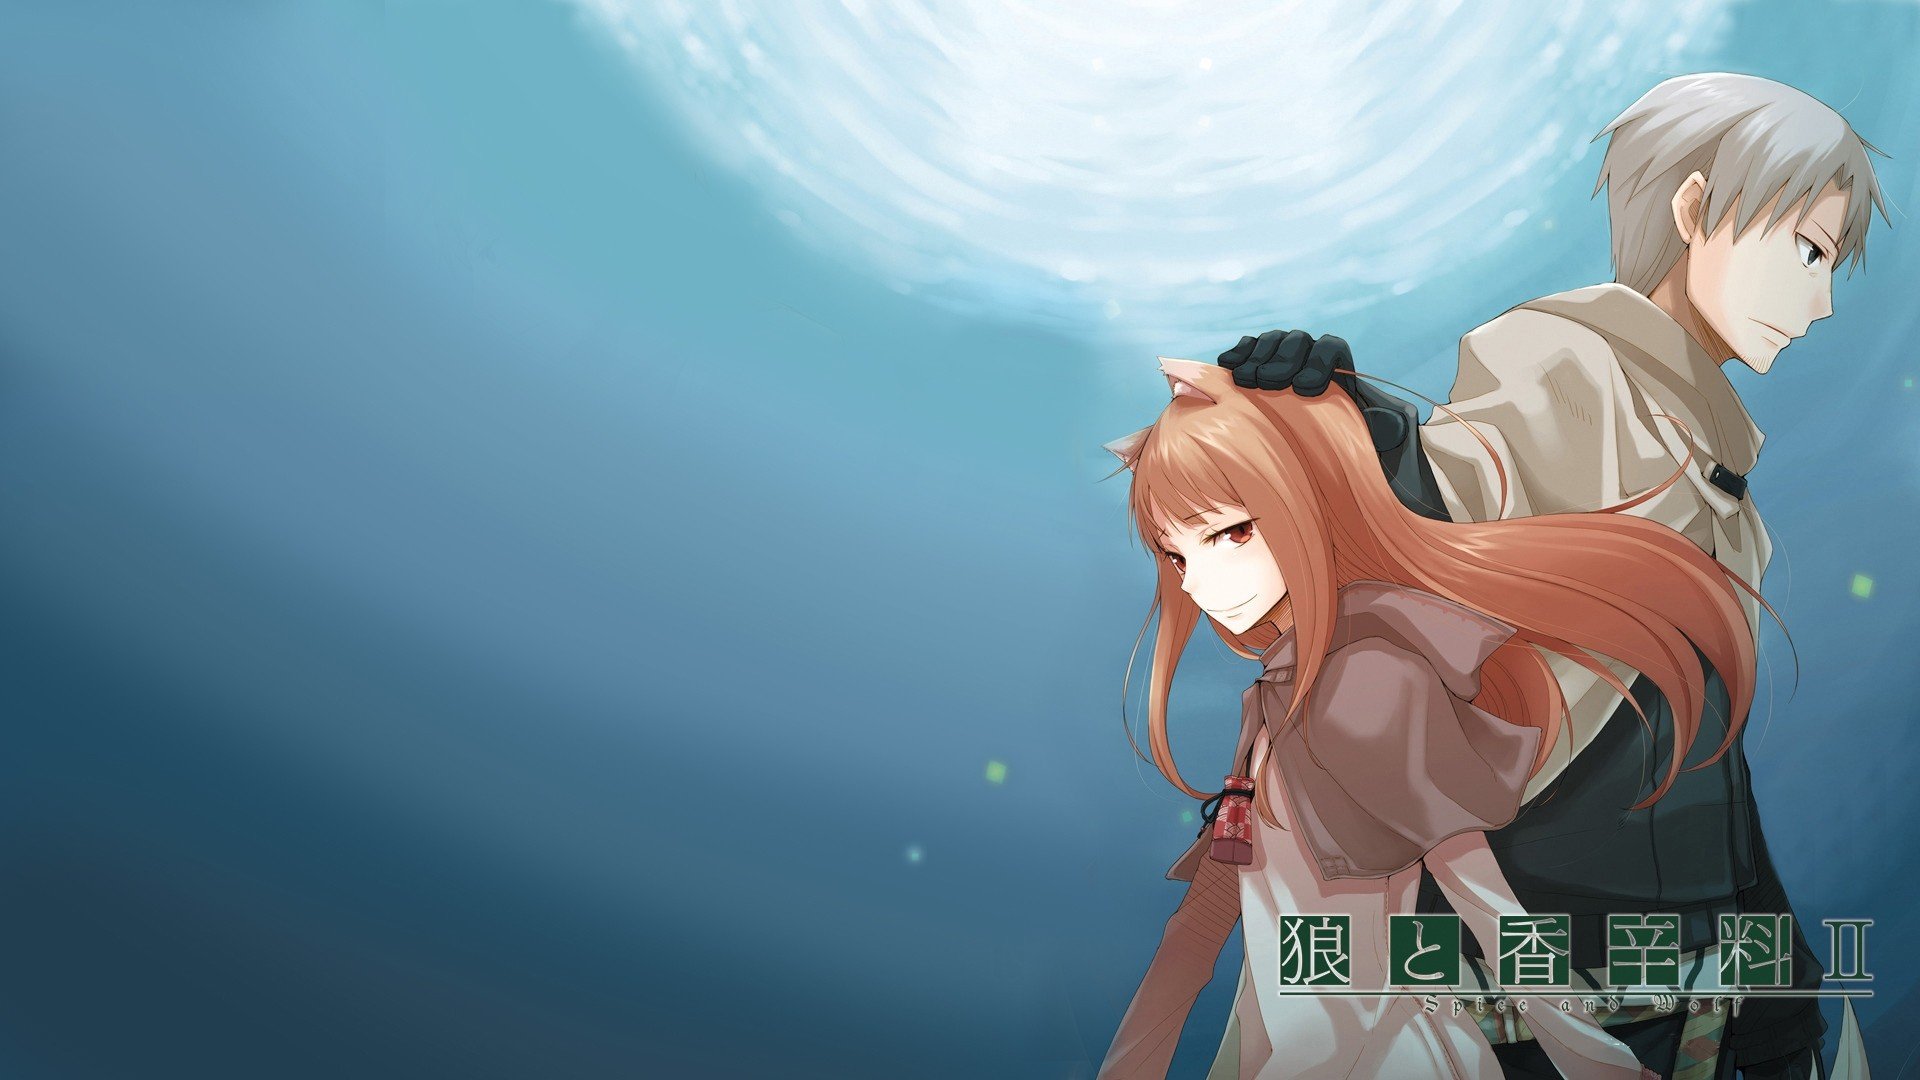 anime, Spice and Wolf, Holo, Lawrence Craft, Anime girls Wallpaper